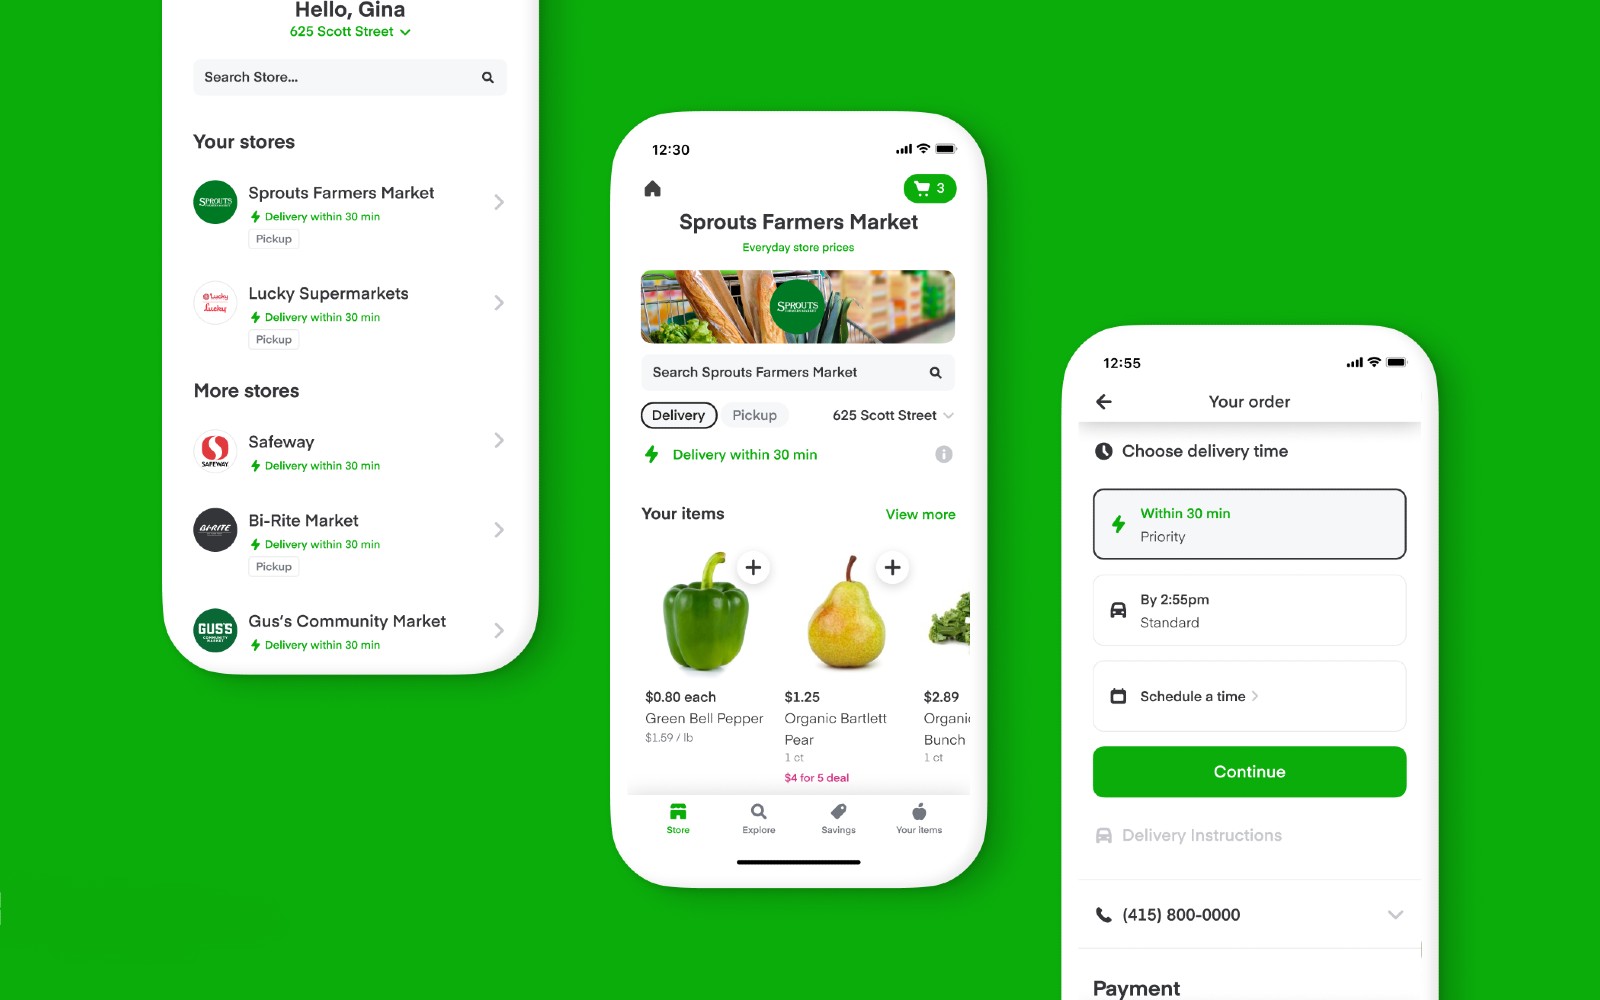 Instacart provides 30-minute deliveries in some US cities